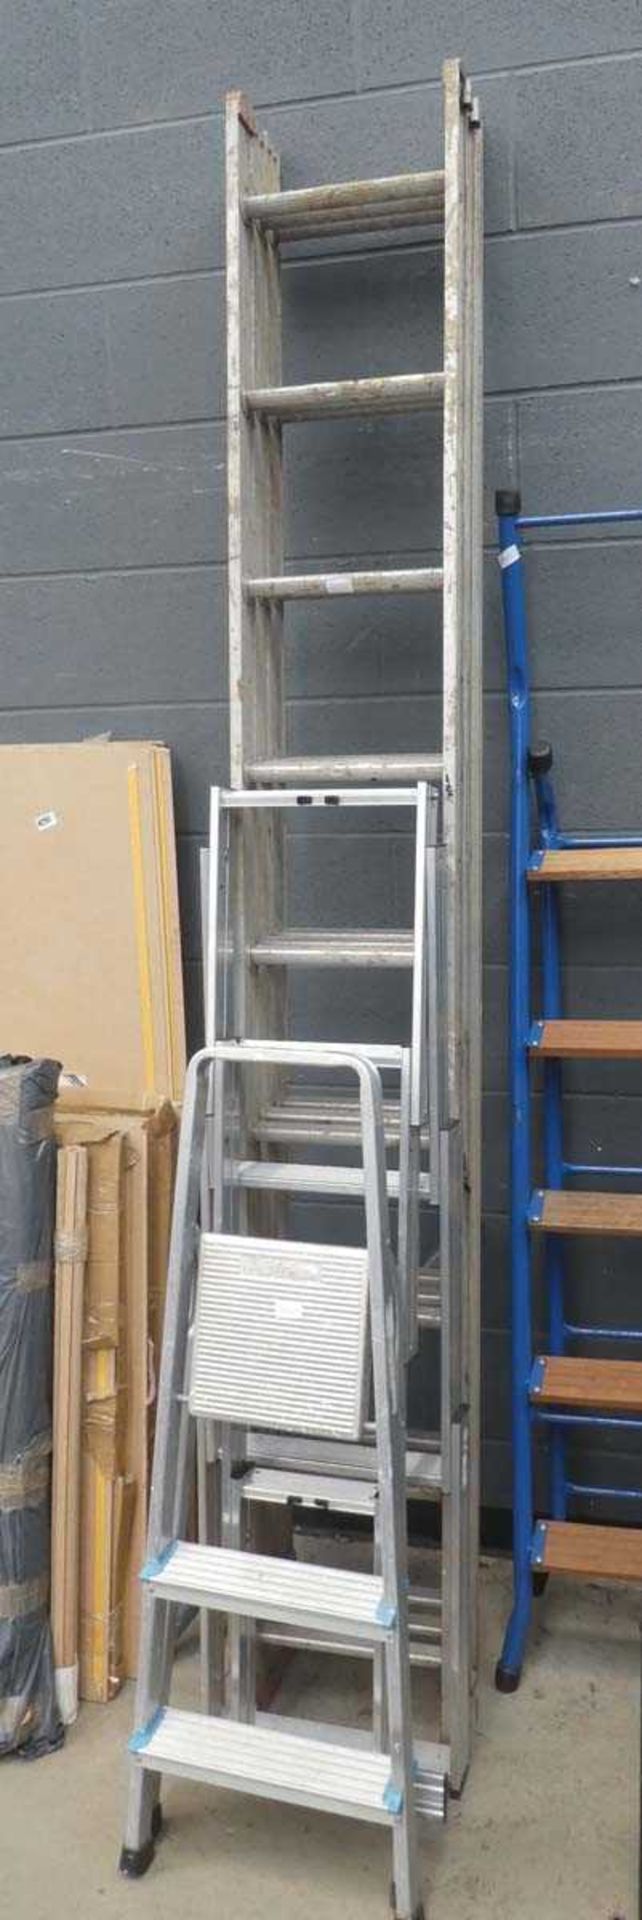 3-section aluminium ladder and 2 stepladders